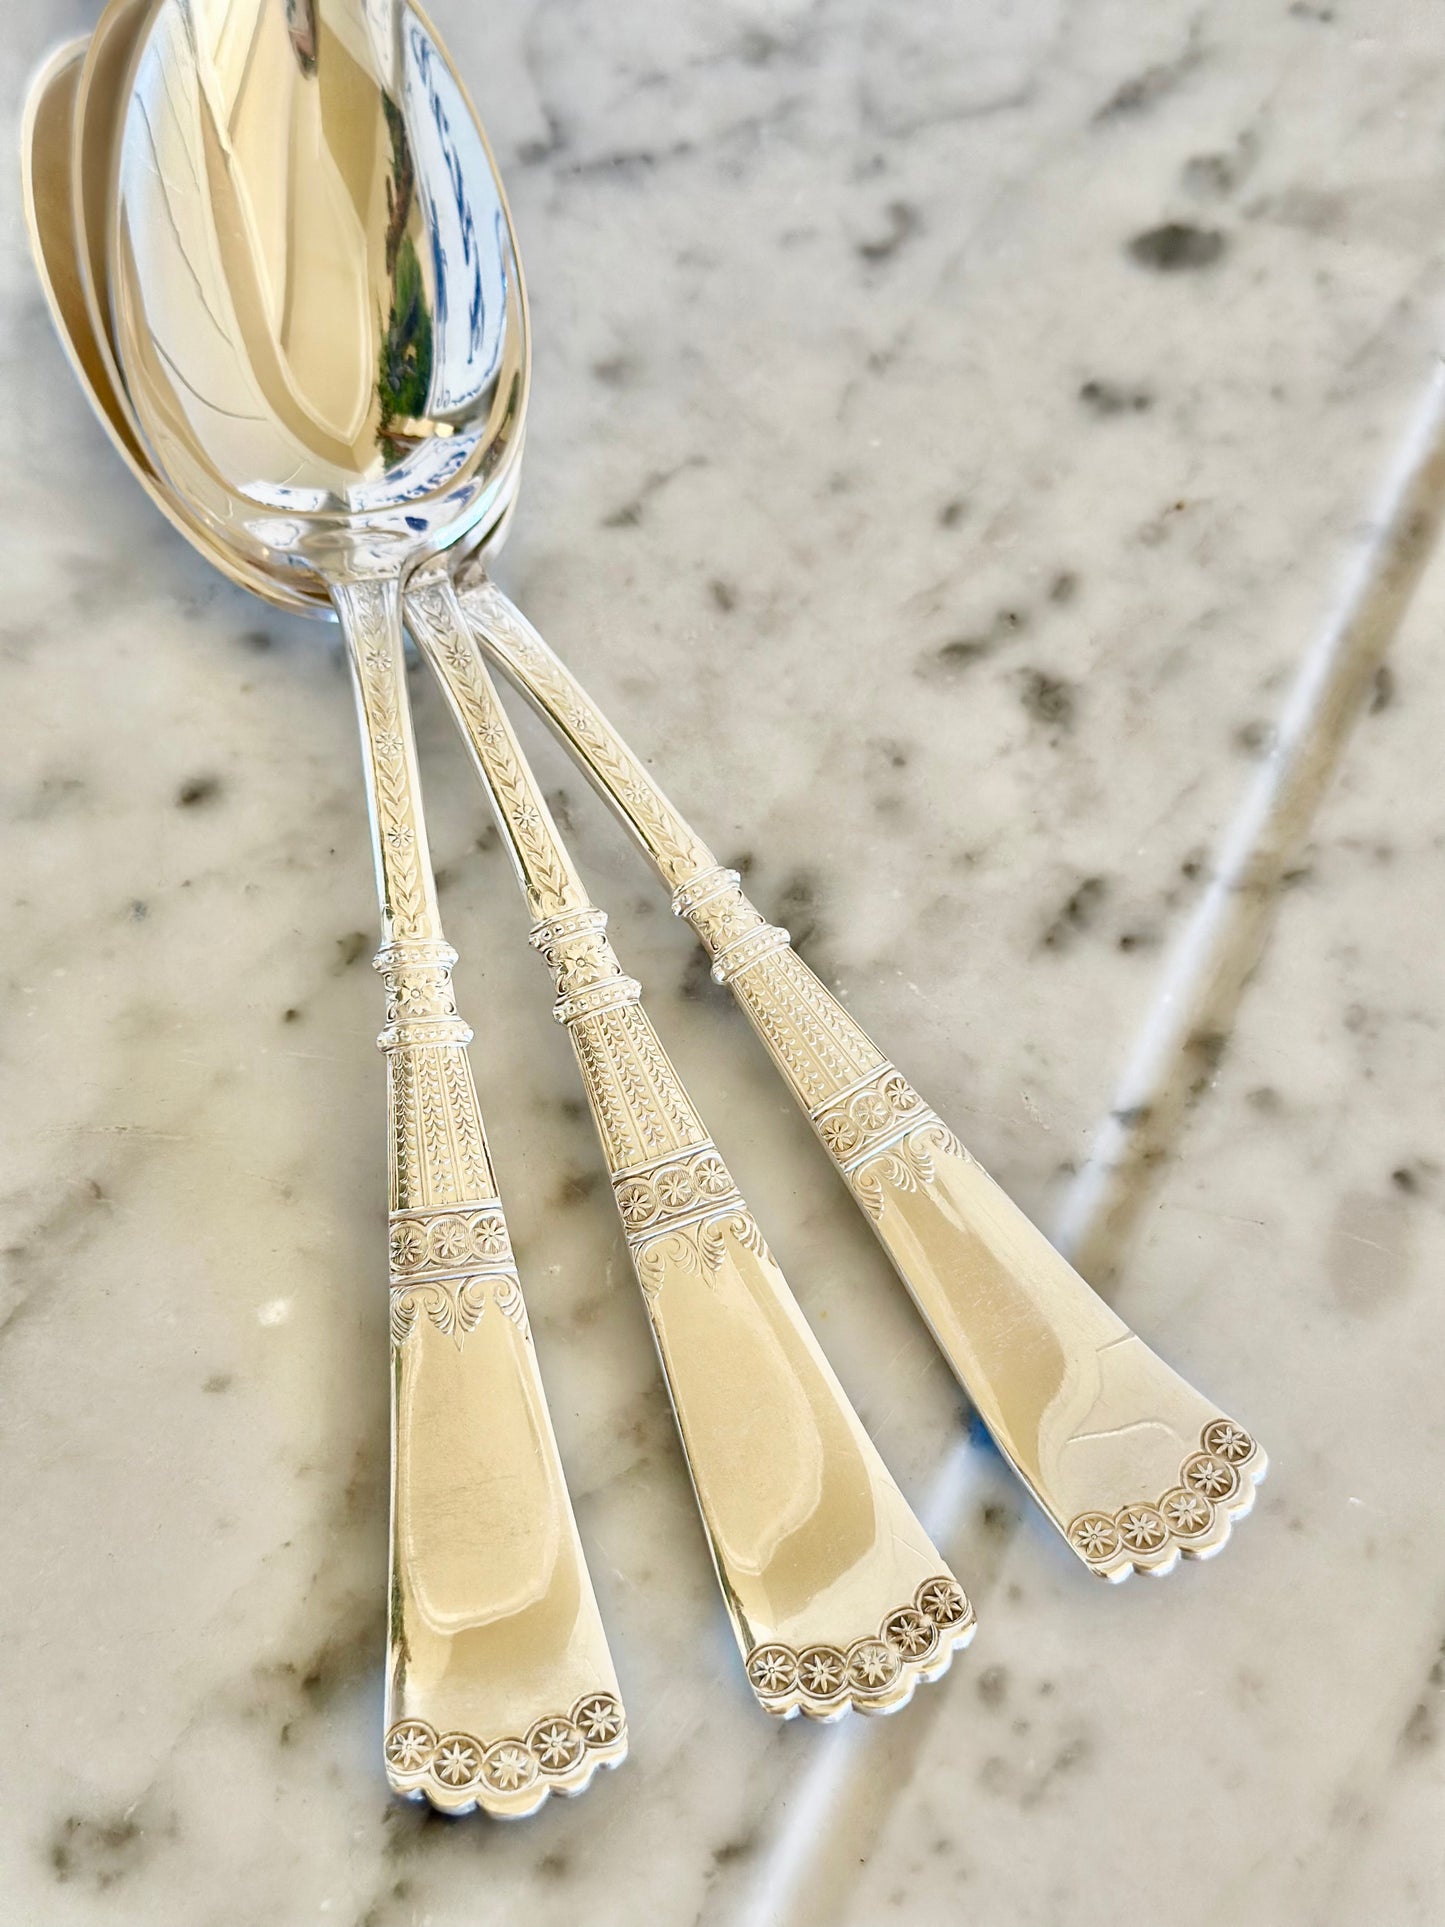 Silverplate Serving Spoons (Set of 3)